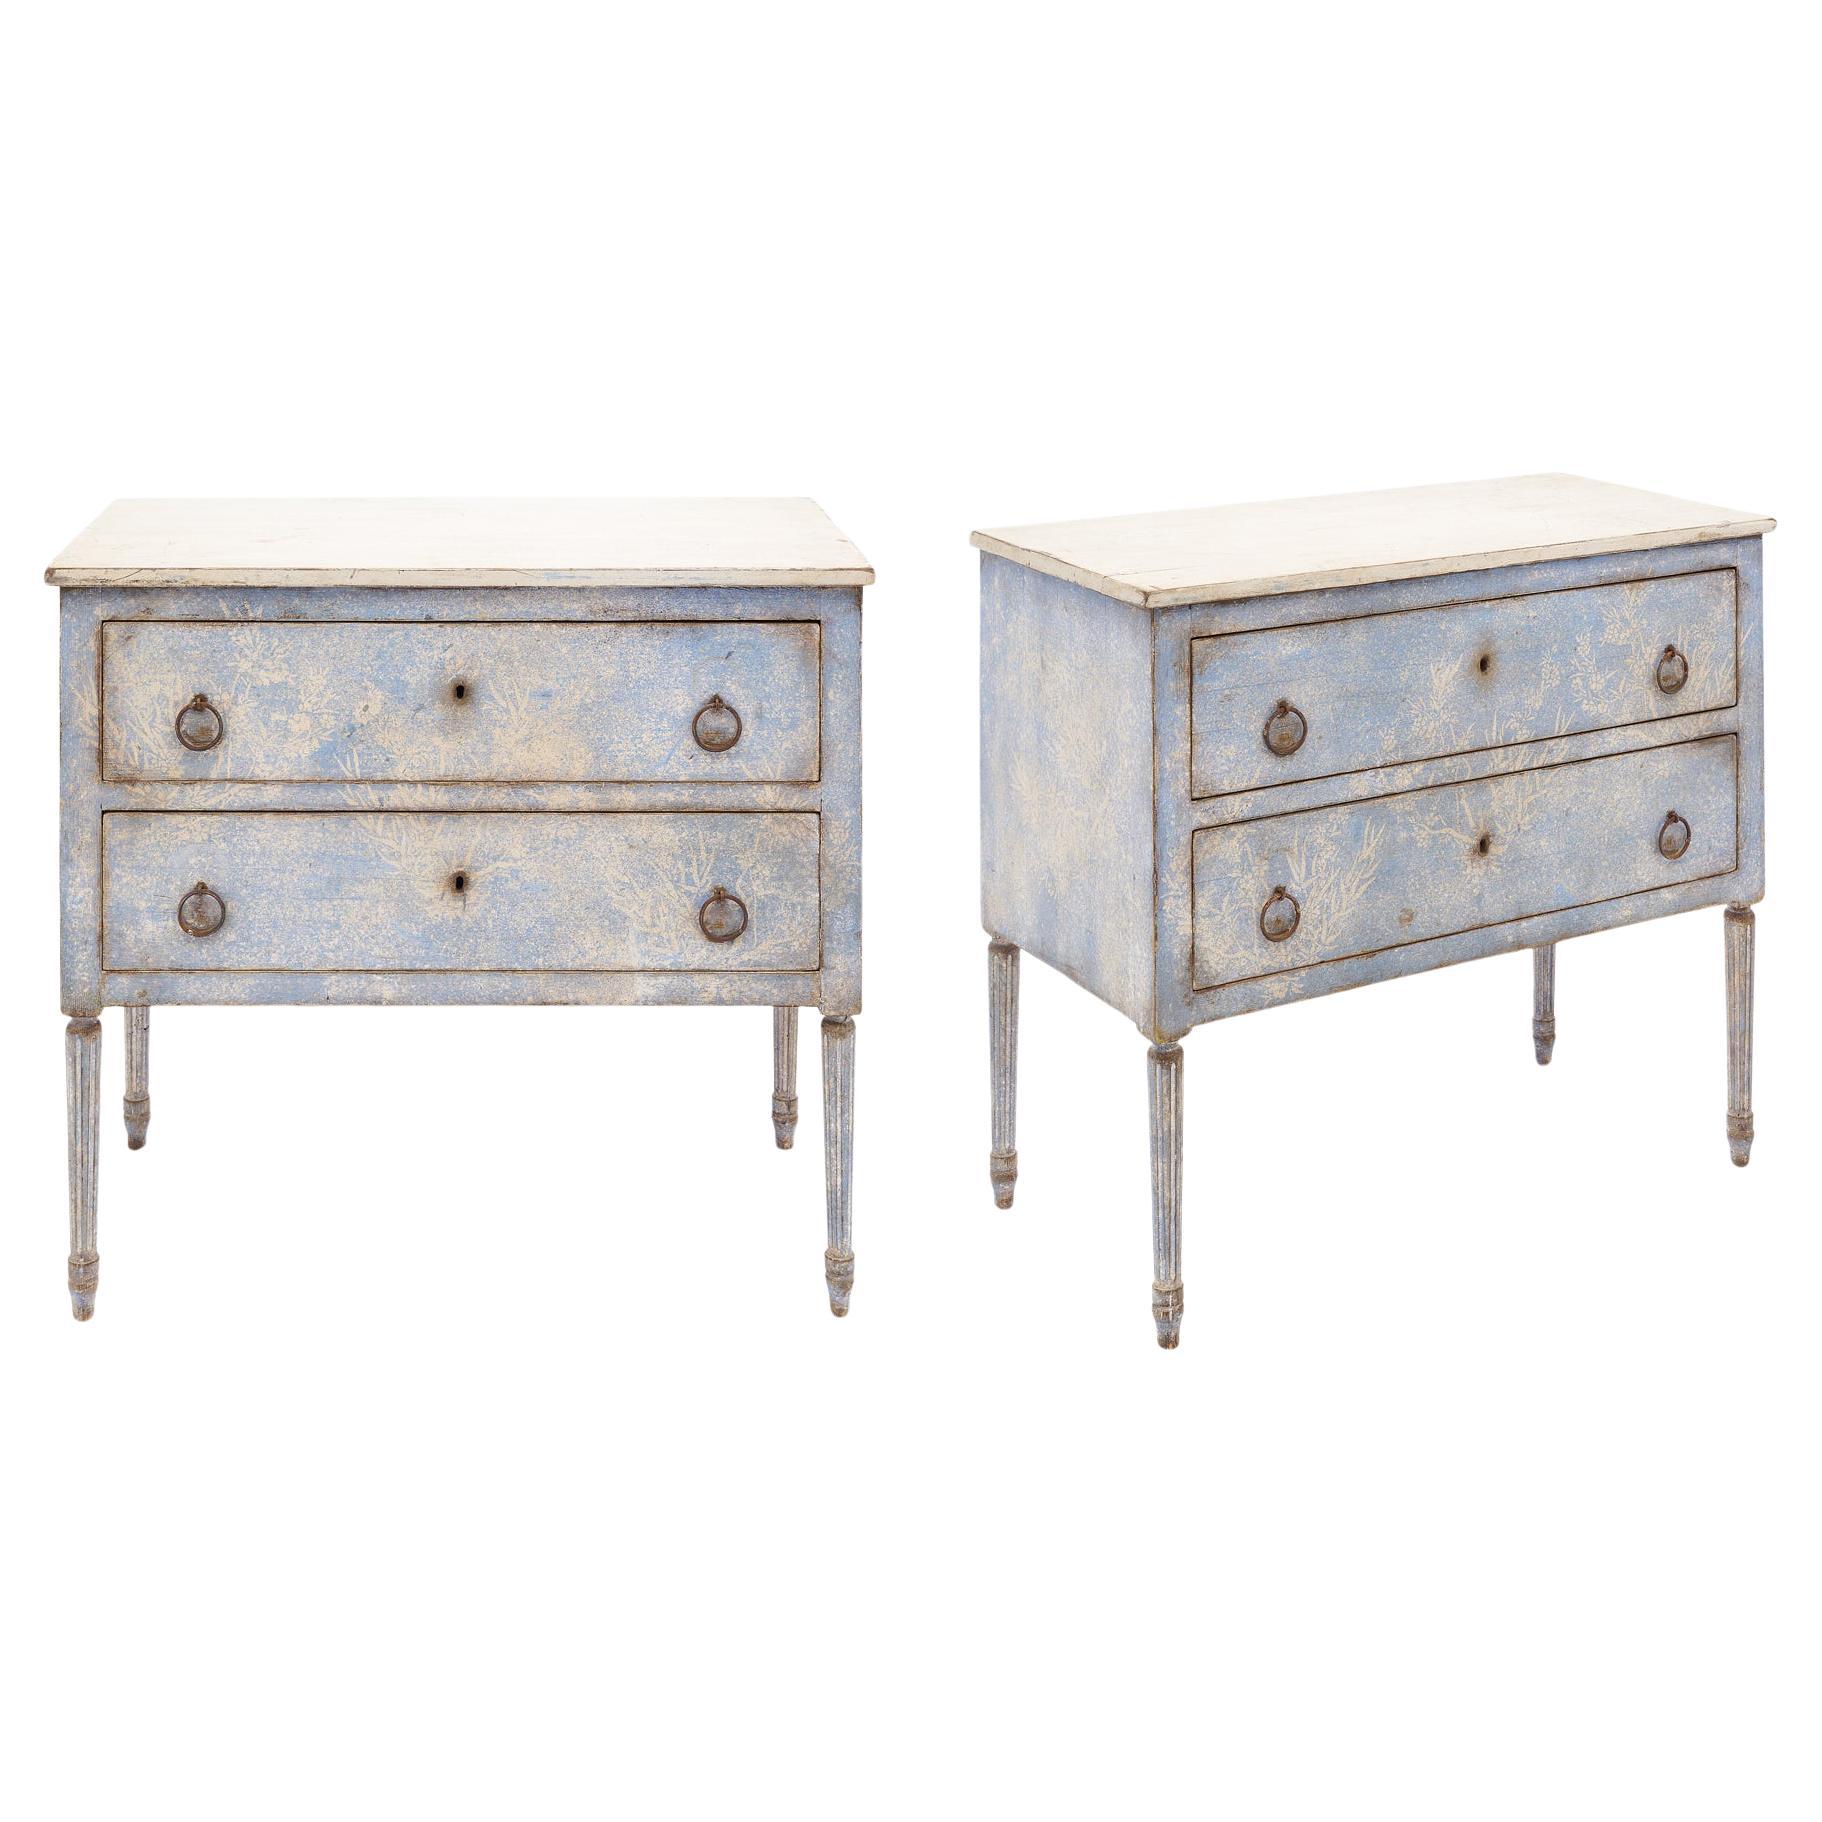 Italian Antique Painted Chests For Sale